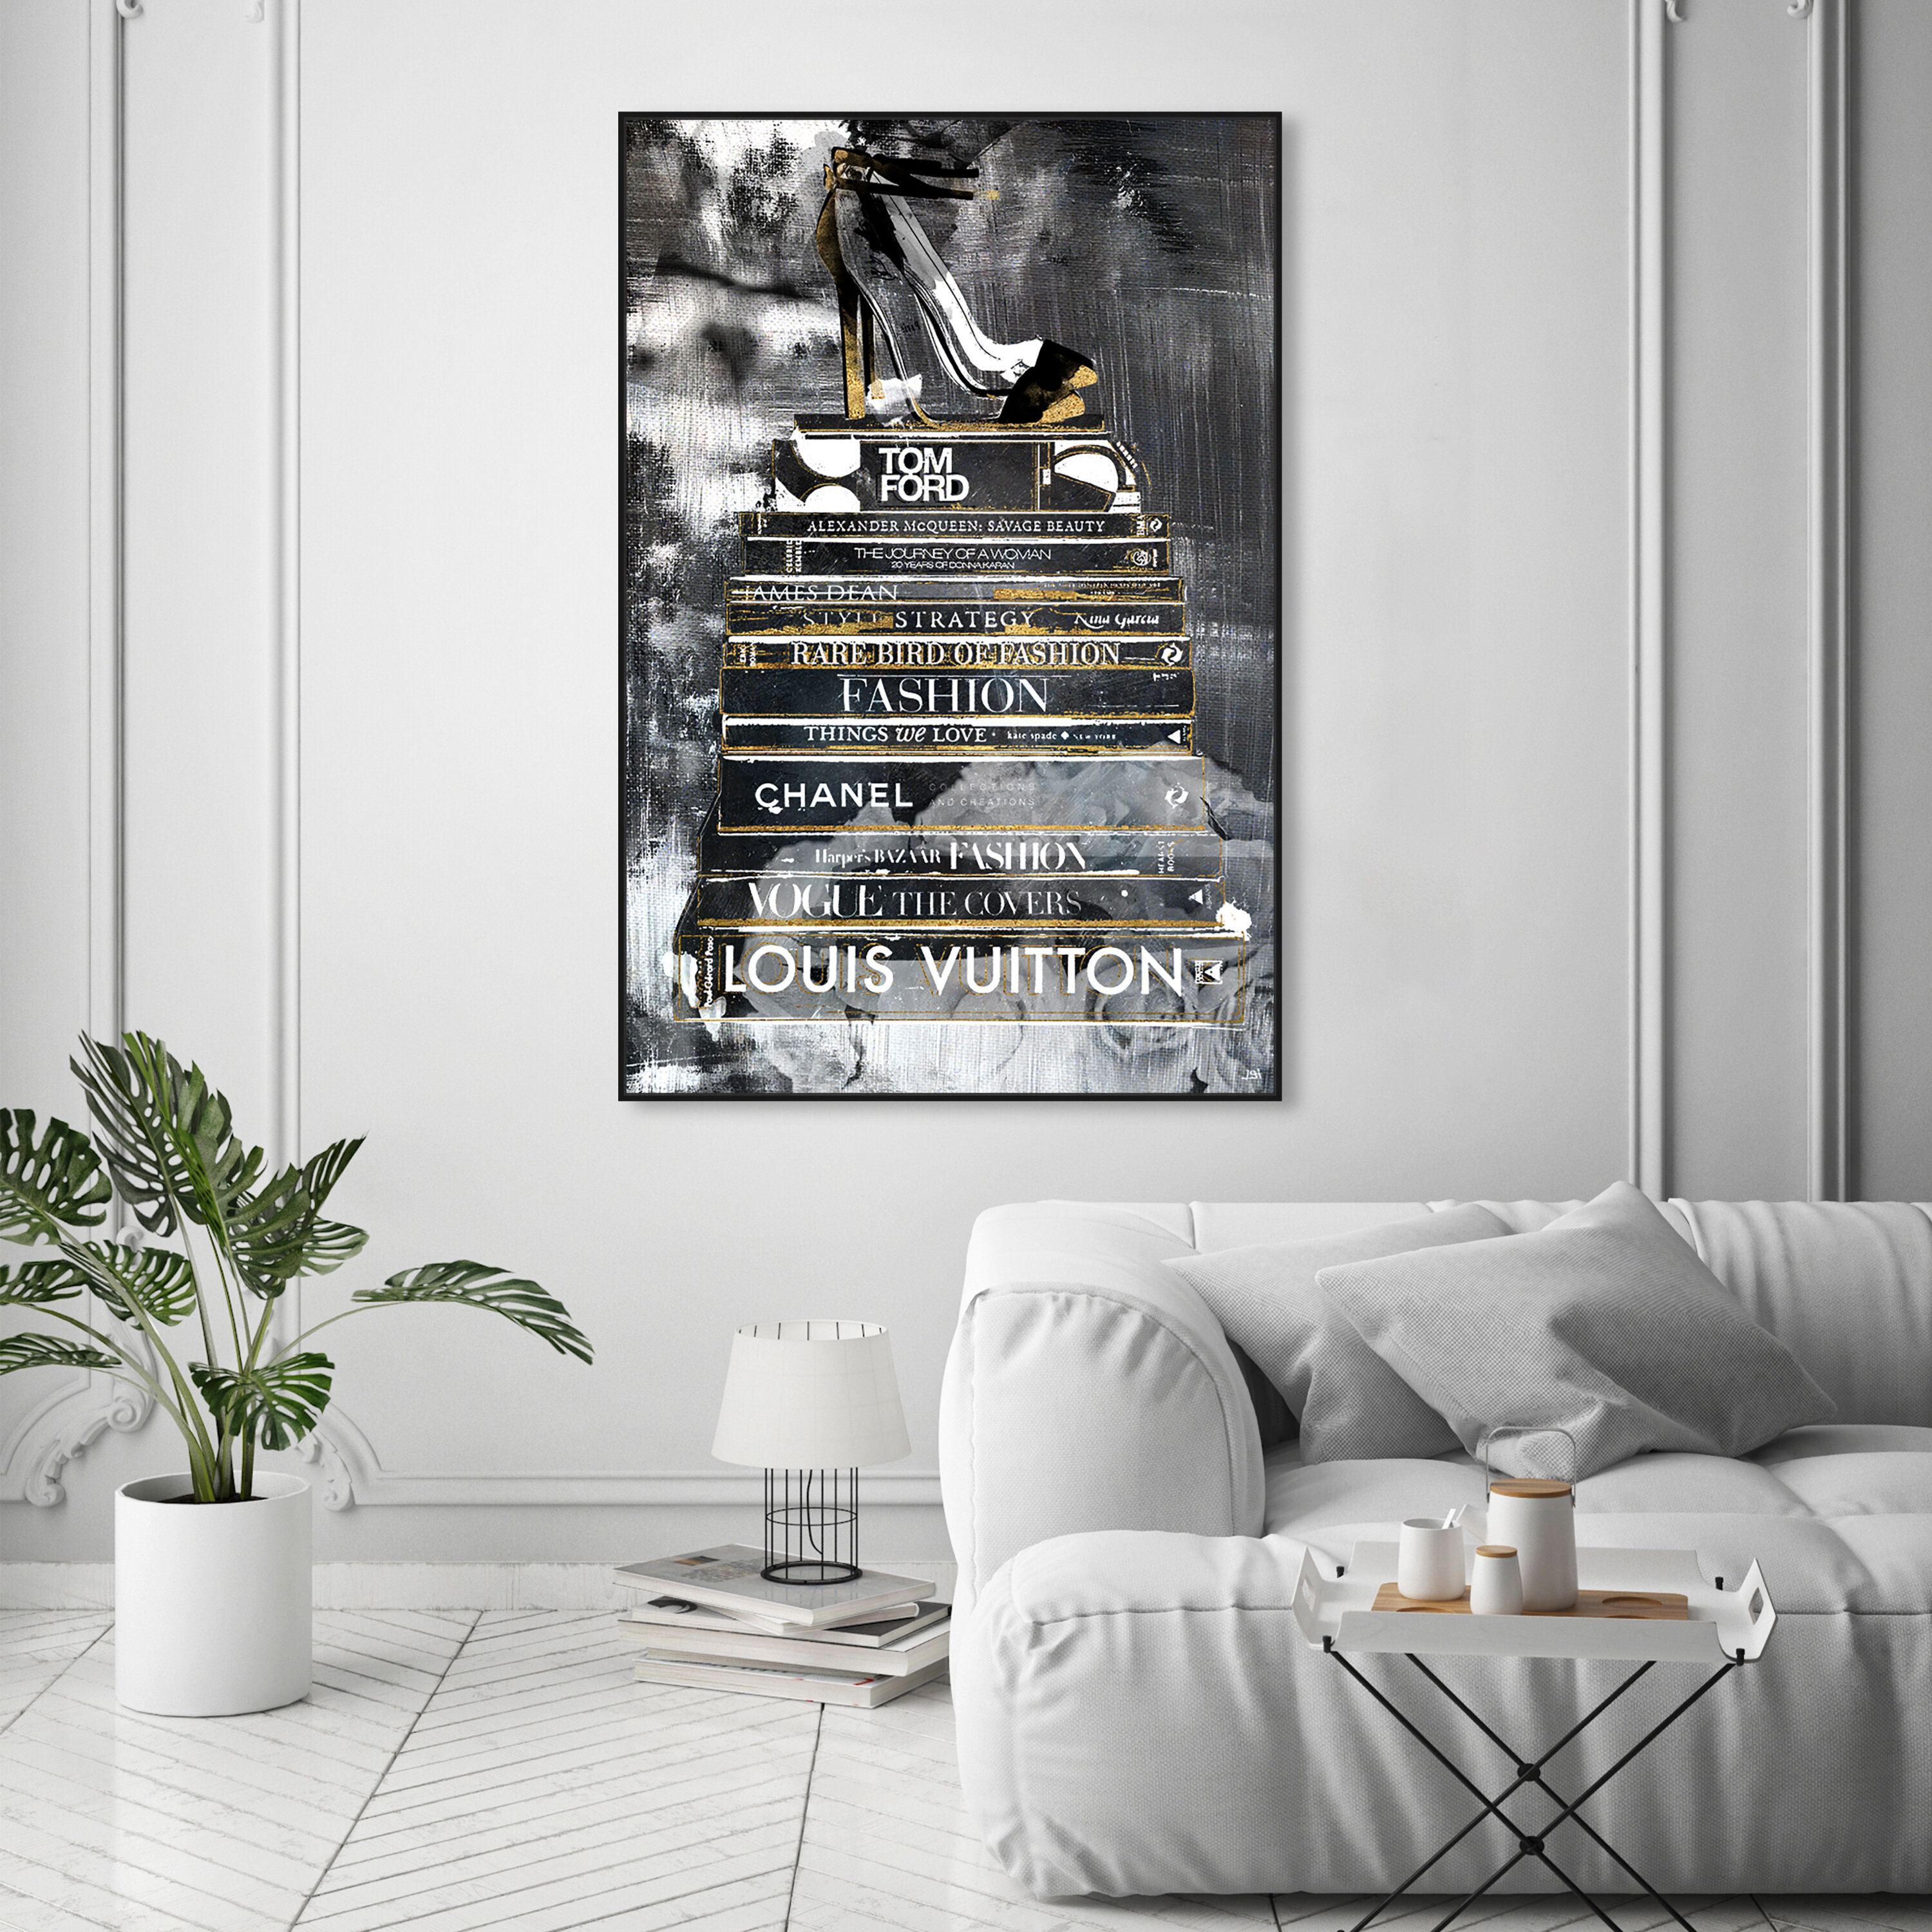 Framed Canvas Art (Champagne) - New Book Stack, Black & White by Amanda Greenwood ( Fashion art) - 26x26 in